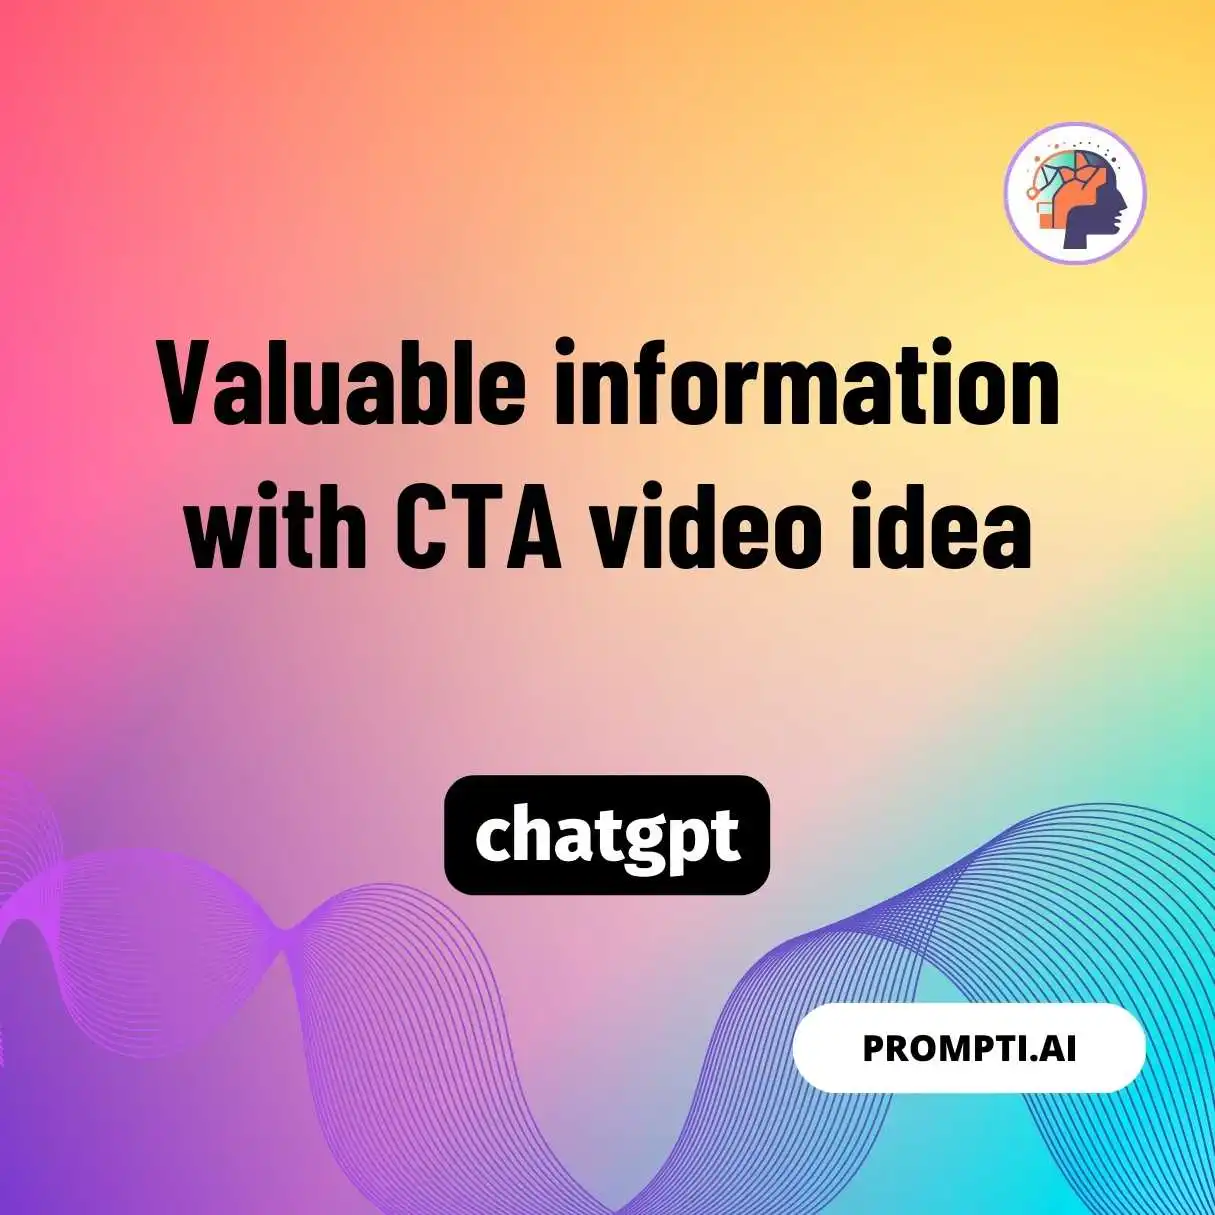 Valuable information with CTA video idea